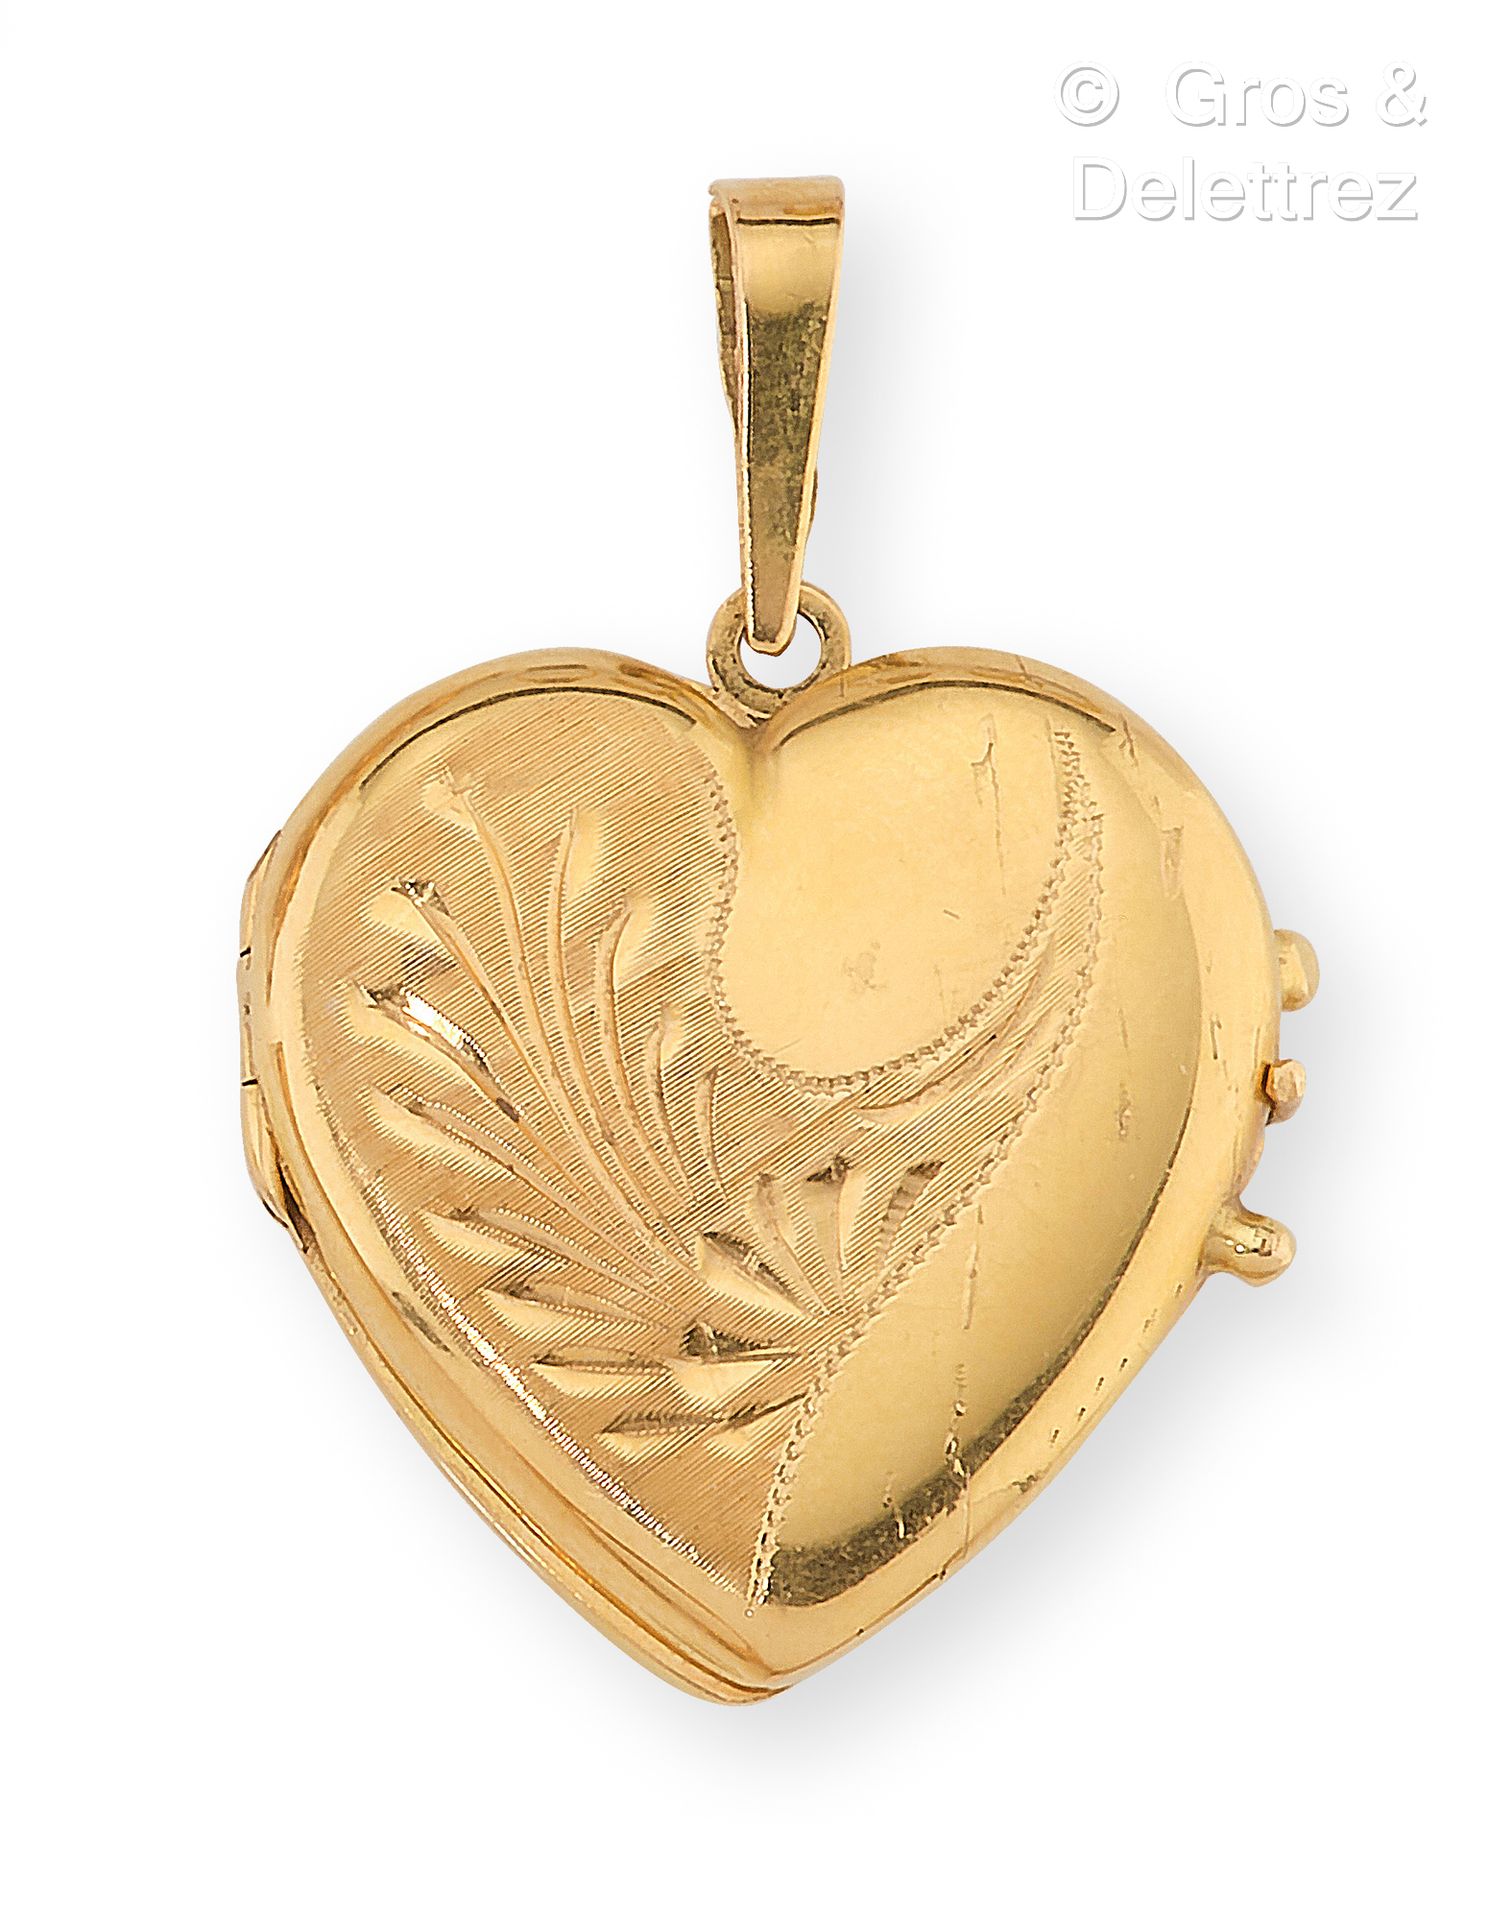 Null Pendant souvenir holder "Heart" in yellow gold, engraved with floral motifs&hellip;